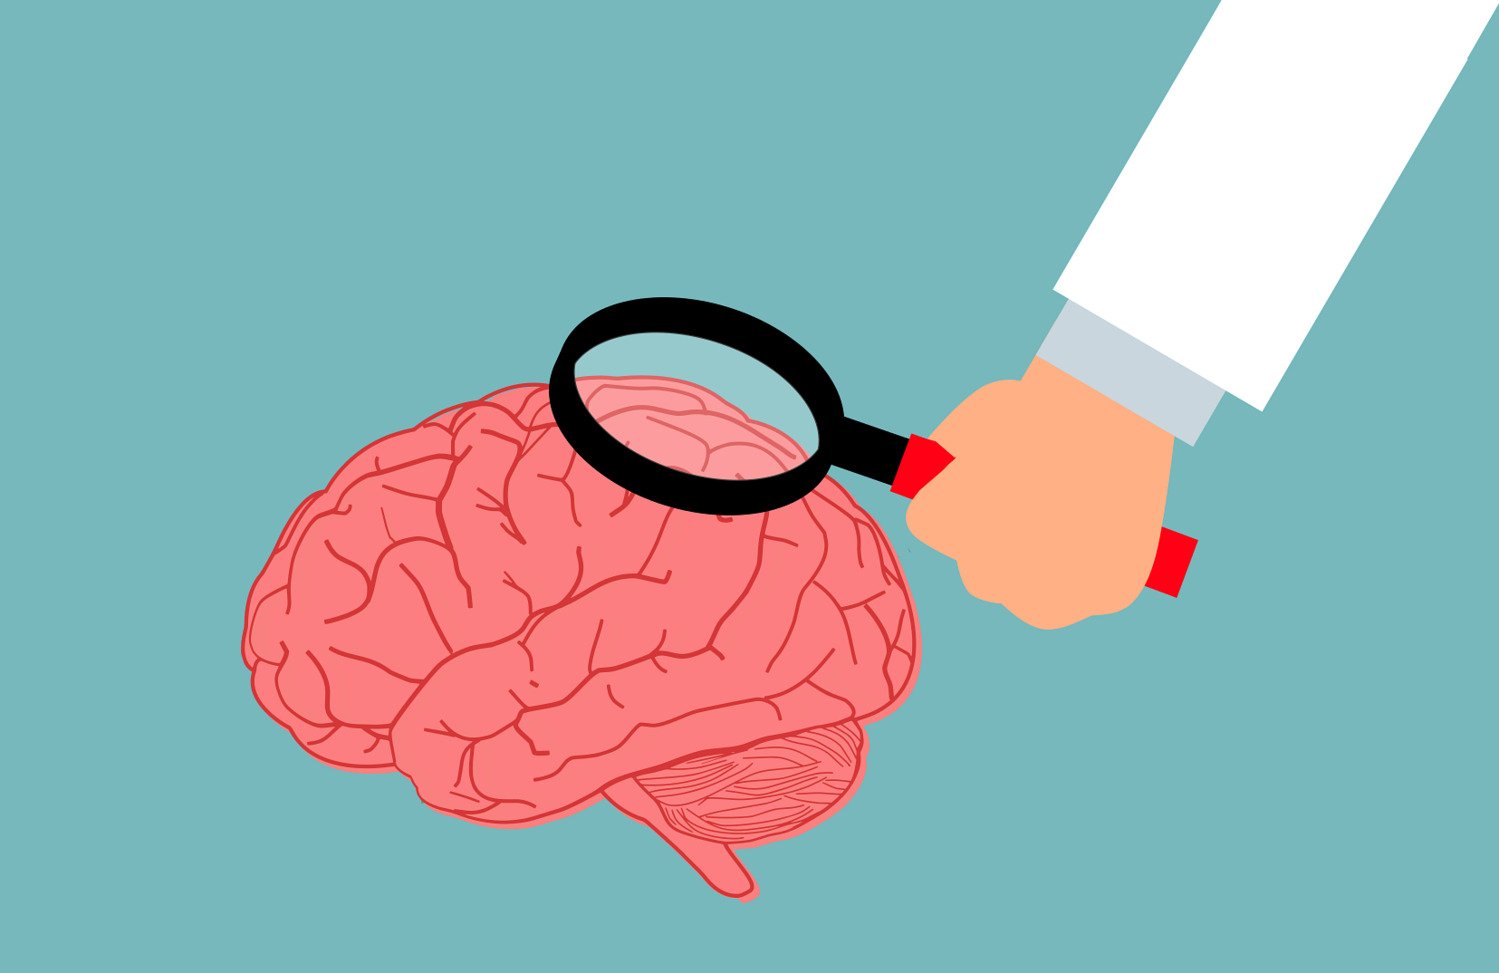 illustration of a hand holding a looking glass over a brain.